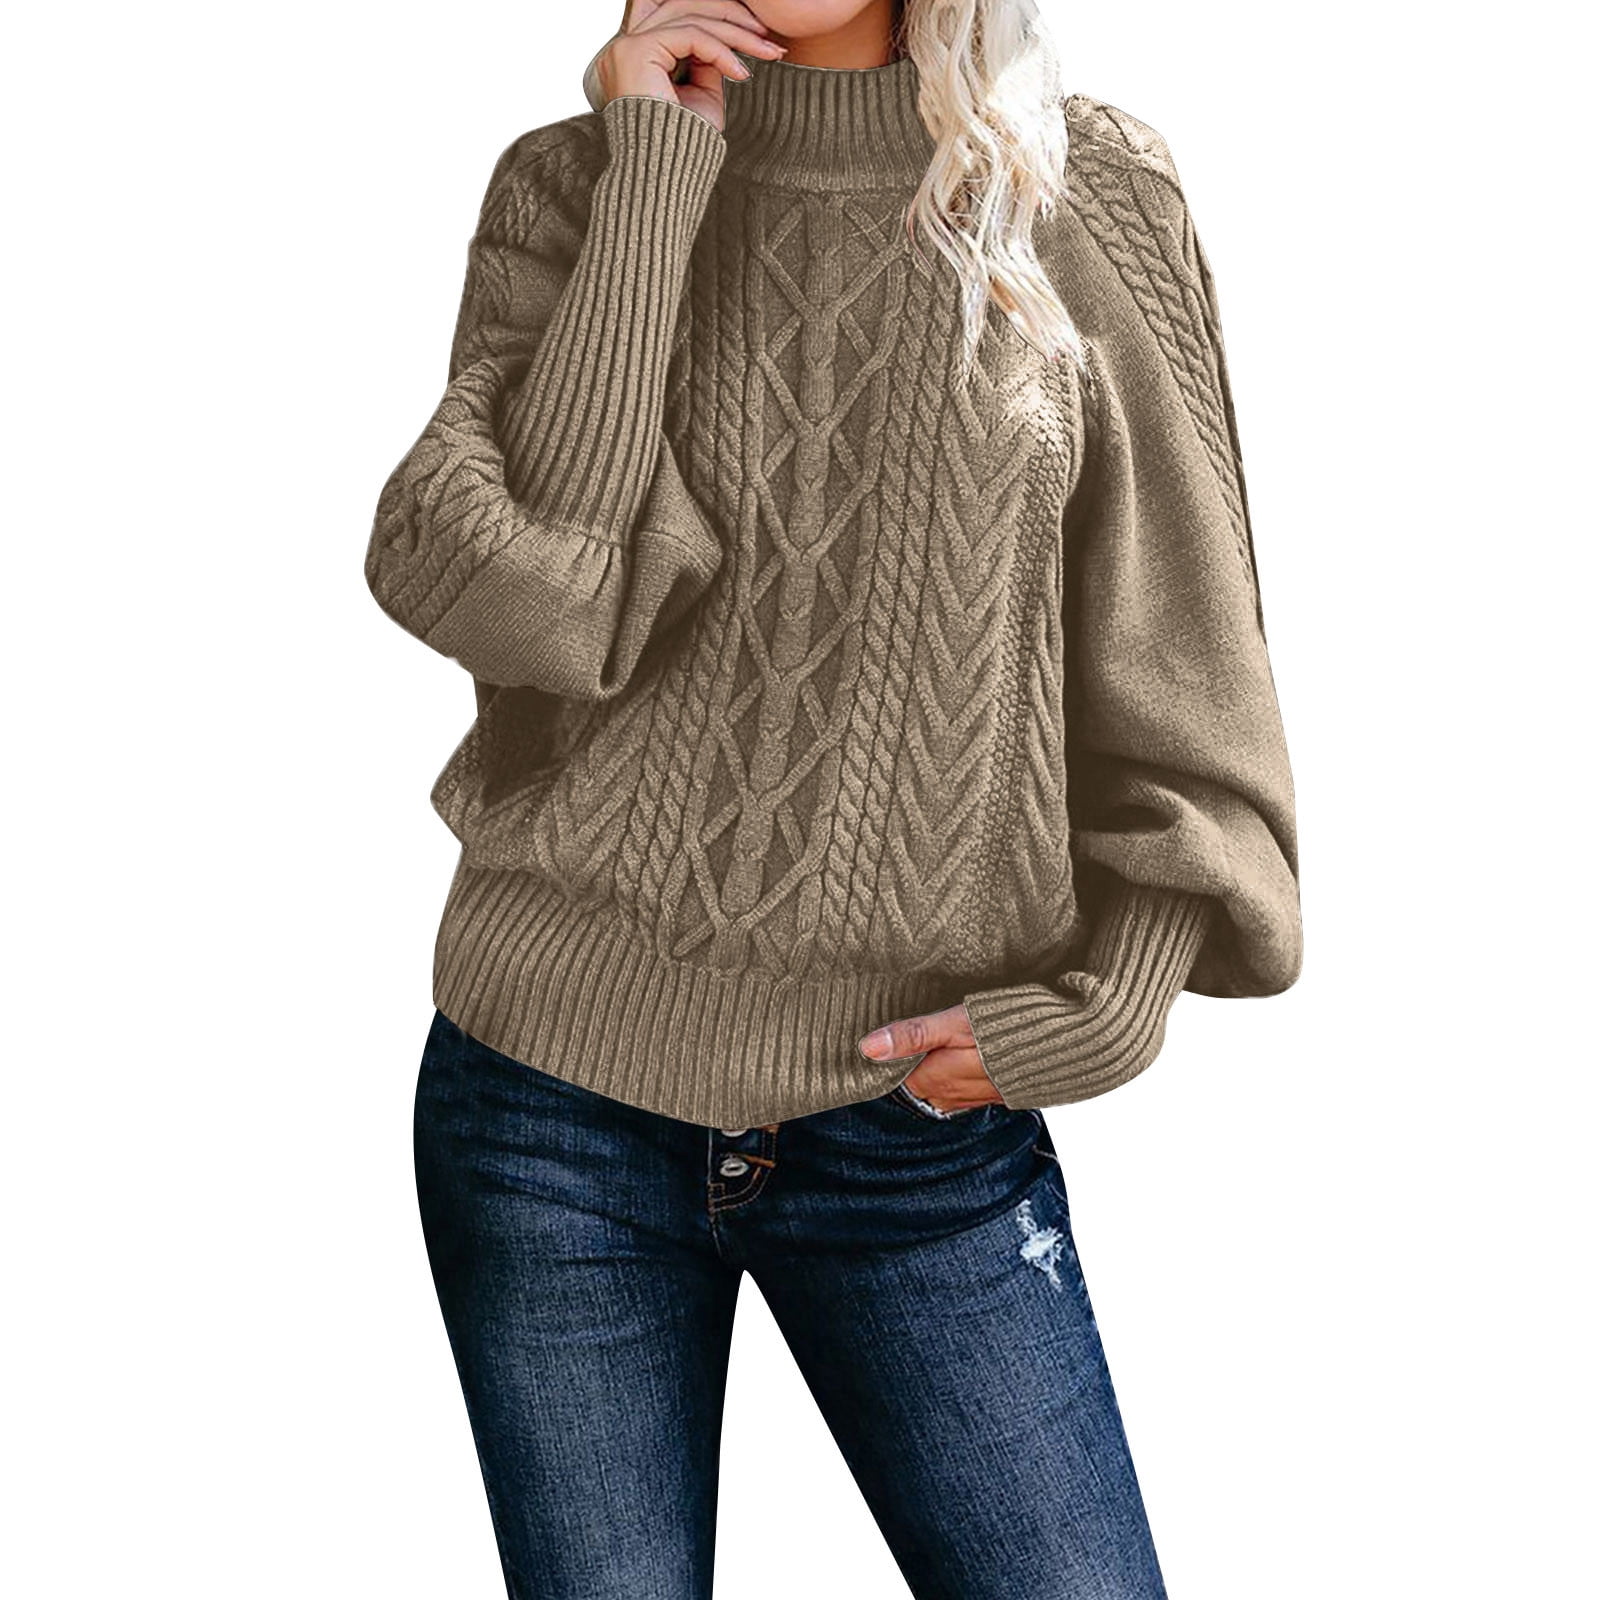 Bkolouuoe Winter Shirts Ladies Mid Neck Sweater Loose Long Sleeve Knit  Solid Color Sweater Pullover Top Pullover Half Zip Sweaters for Women 